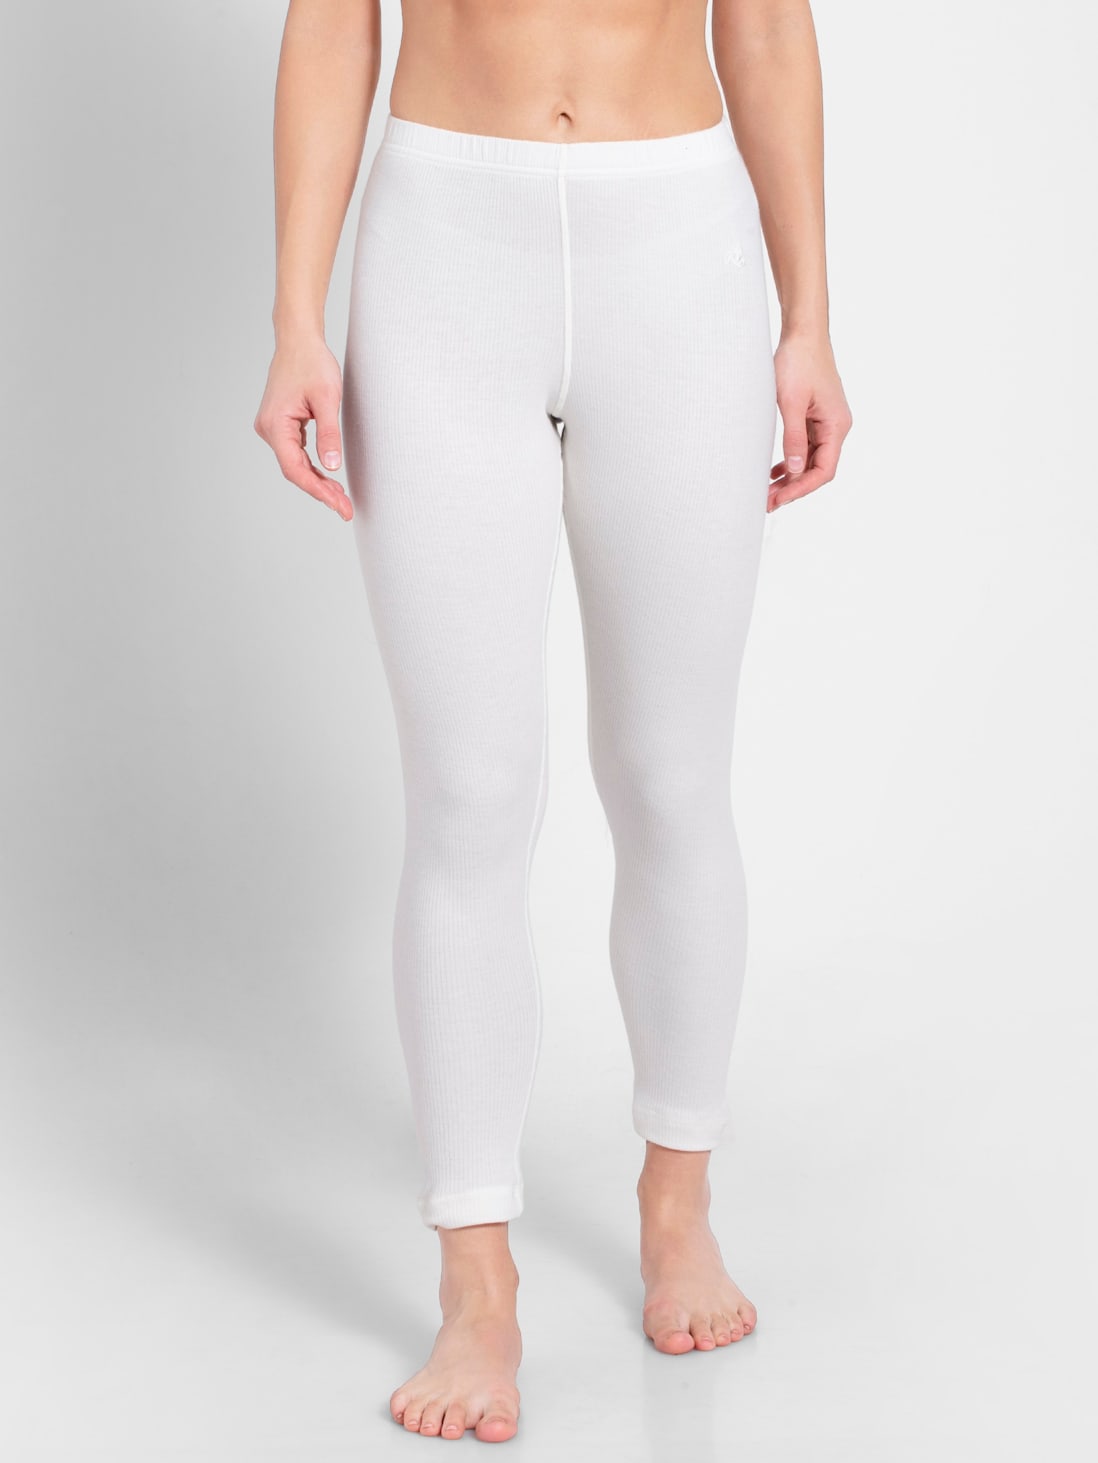 Buy FASO White Solid Cotton Slim Fit Women's Thermal Leggings | Shoppers  Stop-cacanhphuclong.com.vn